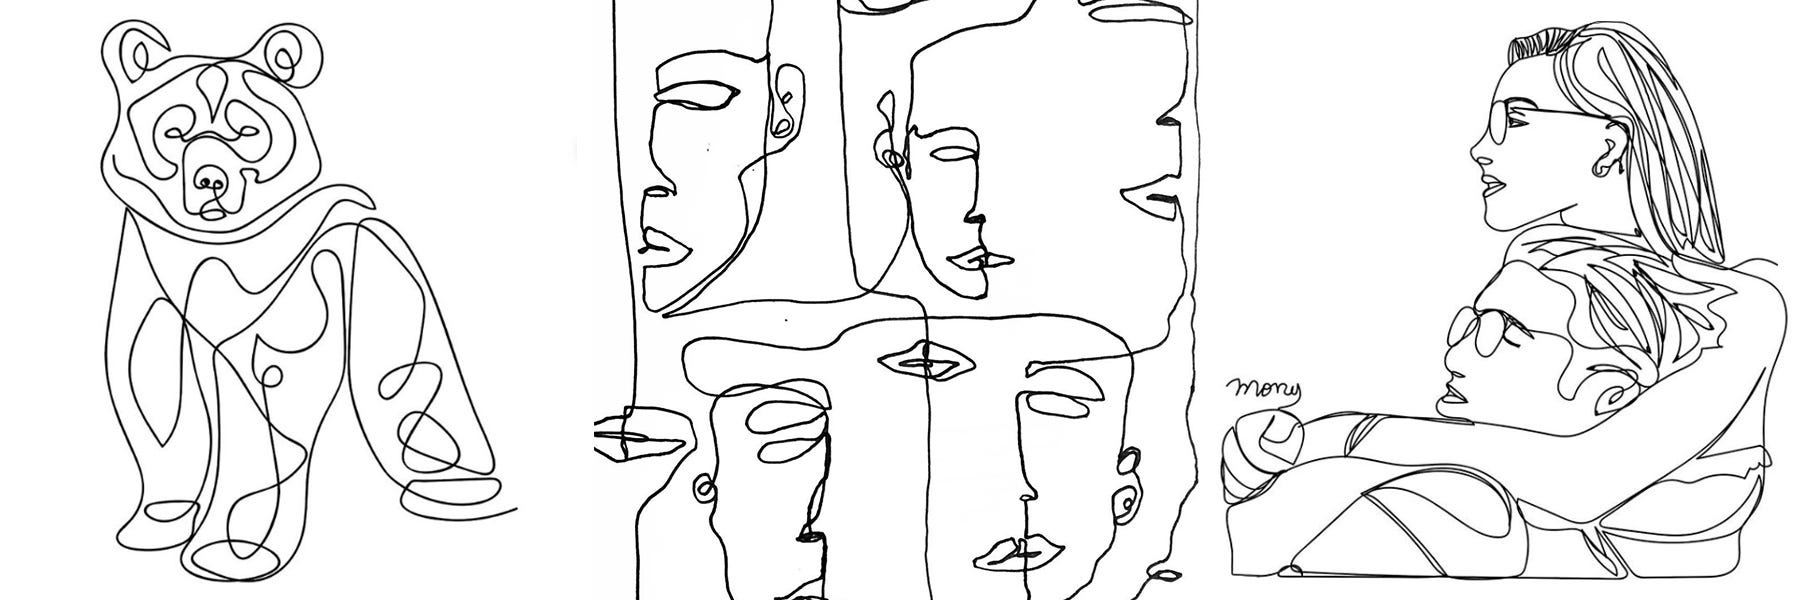 The Art Of One Line Drawings What Is A One Line Drawing And What By Michelle Gemmeke Medium